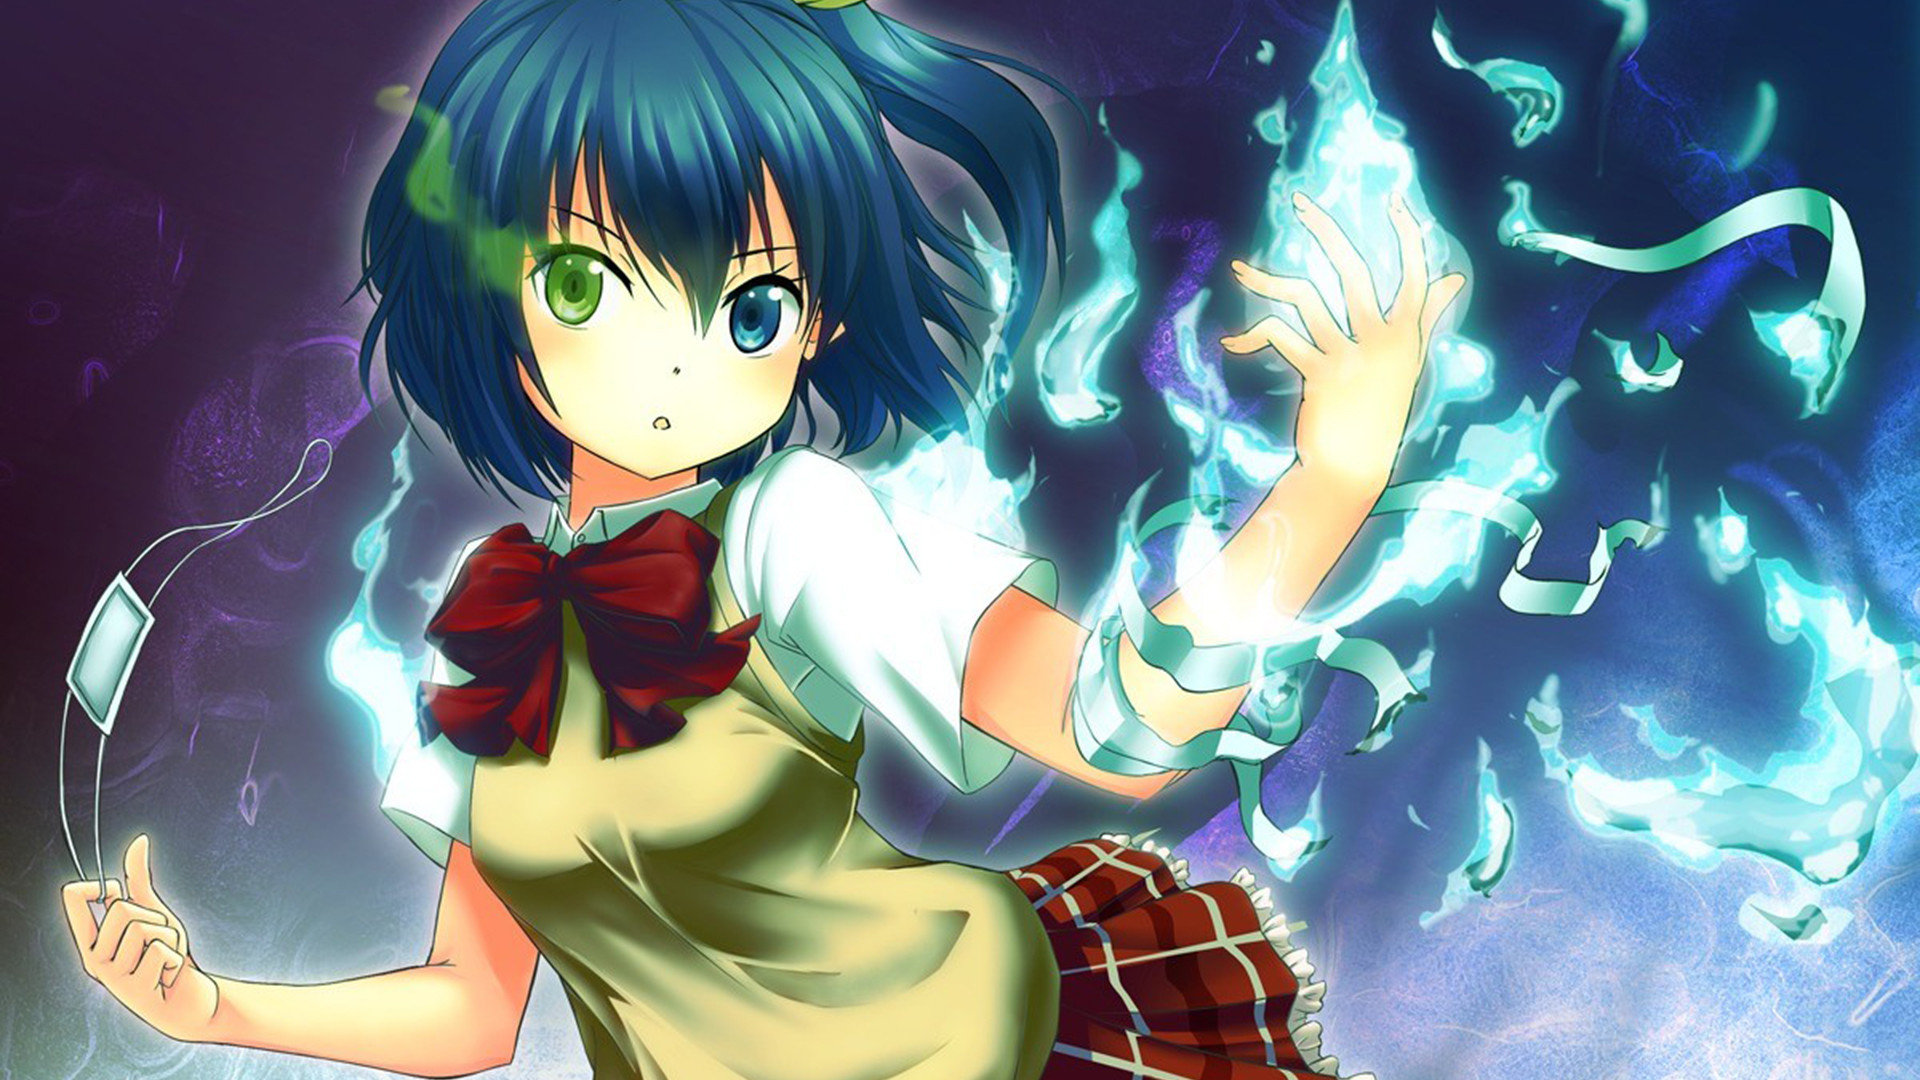 Download hd 1920x1080 Love, Chunibyo and Other Delusions desktop background ID:423317 for free